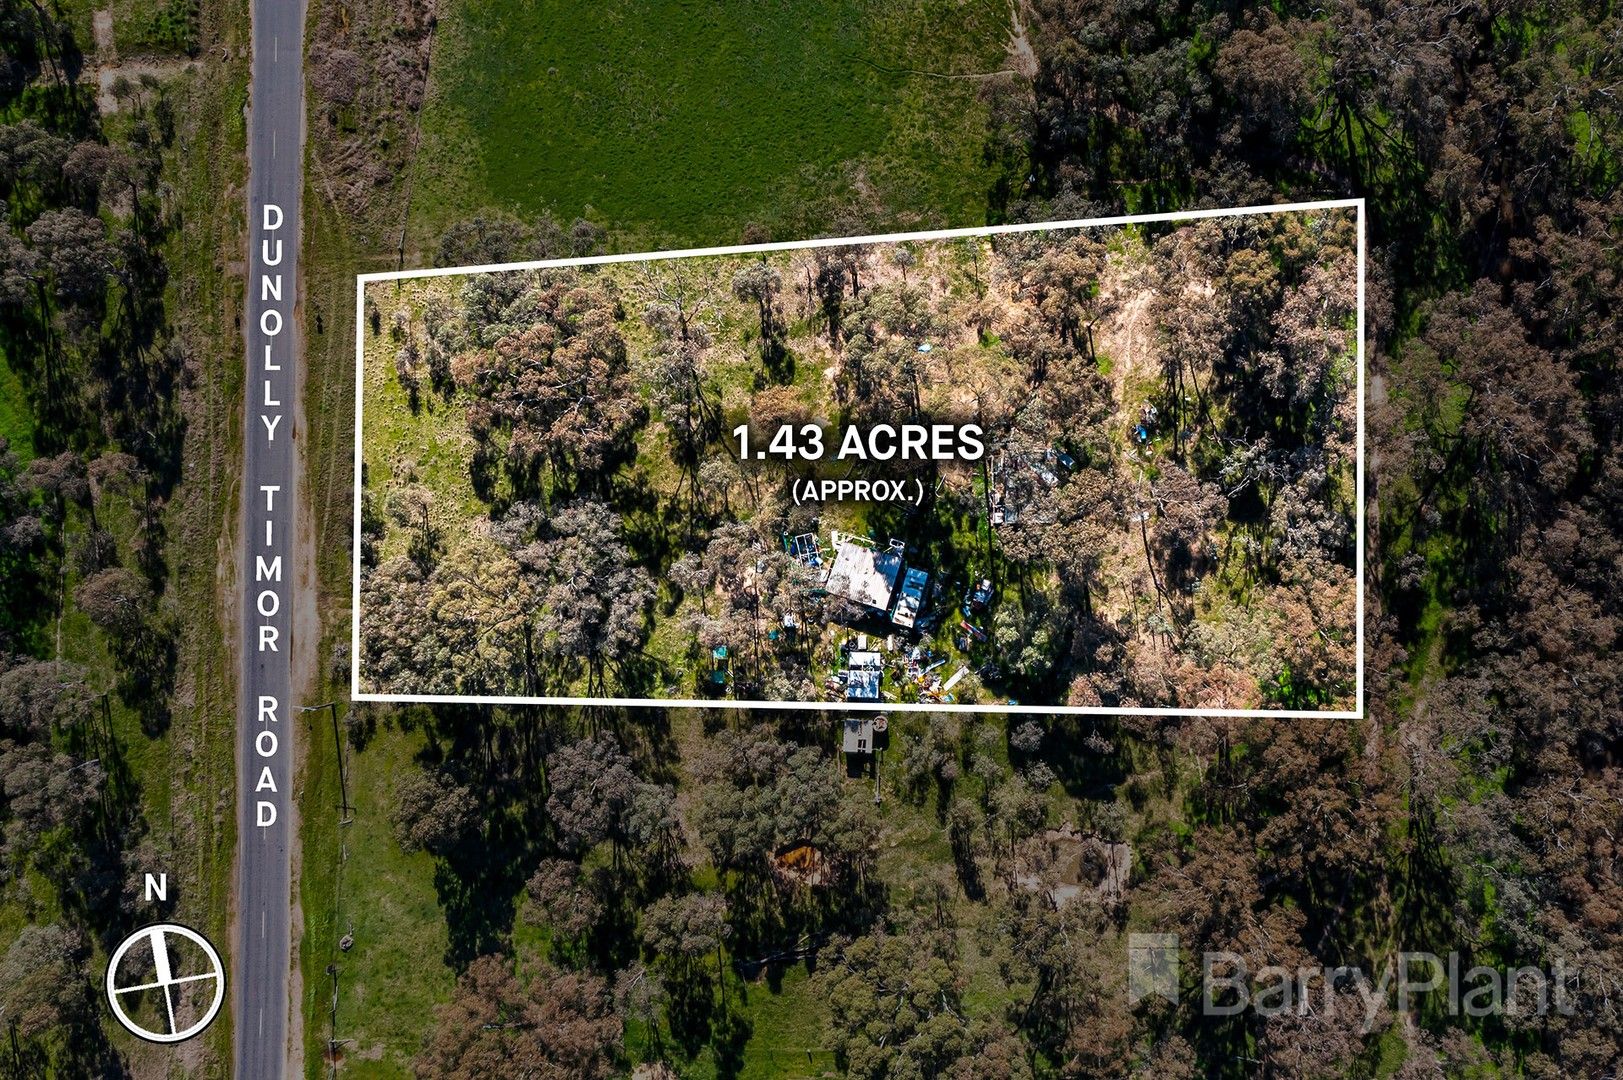 1201 Dunolly - Timor Road, Timor VIC 3465, Image 0